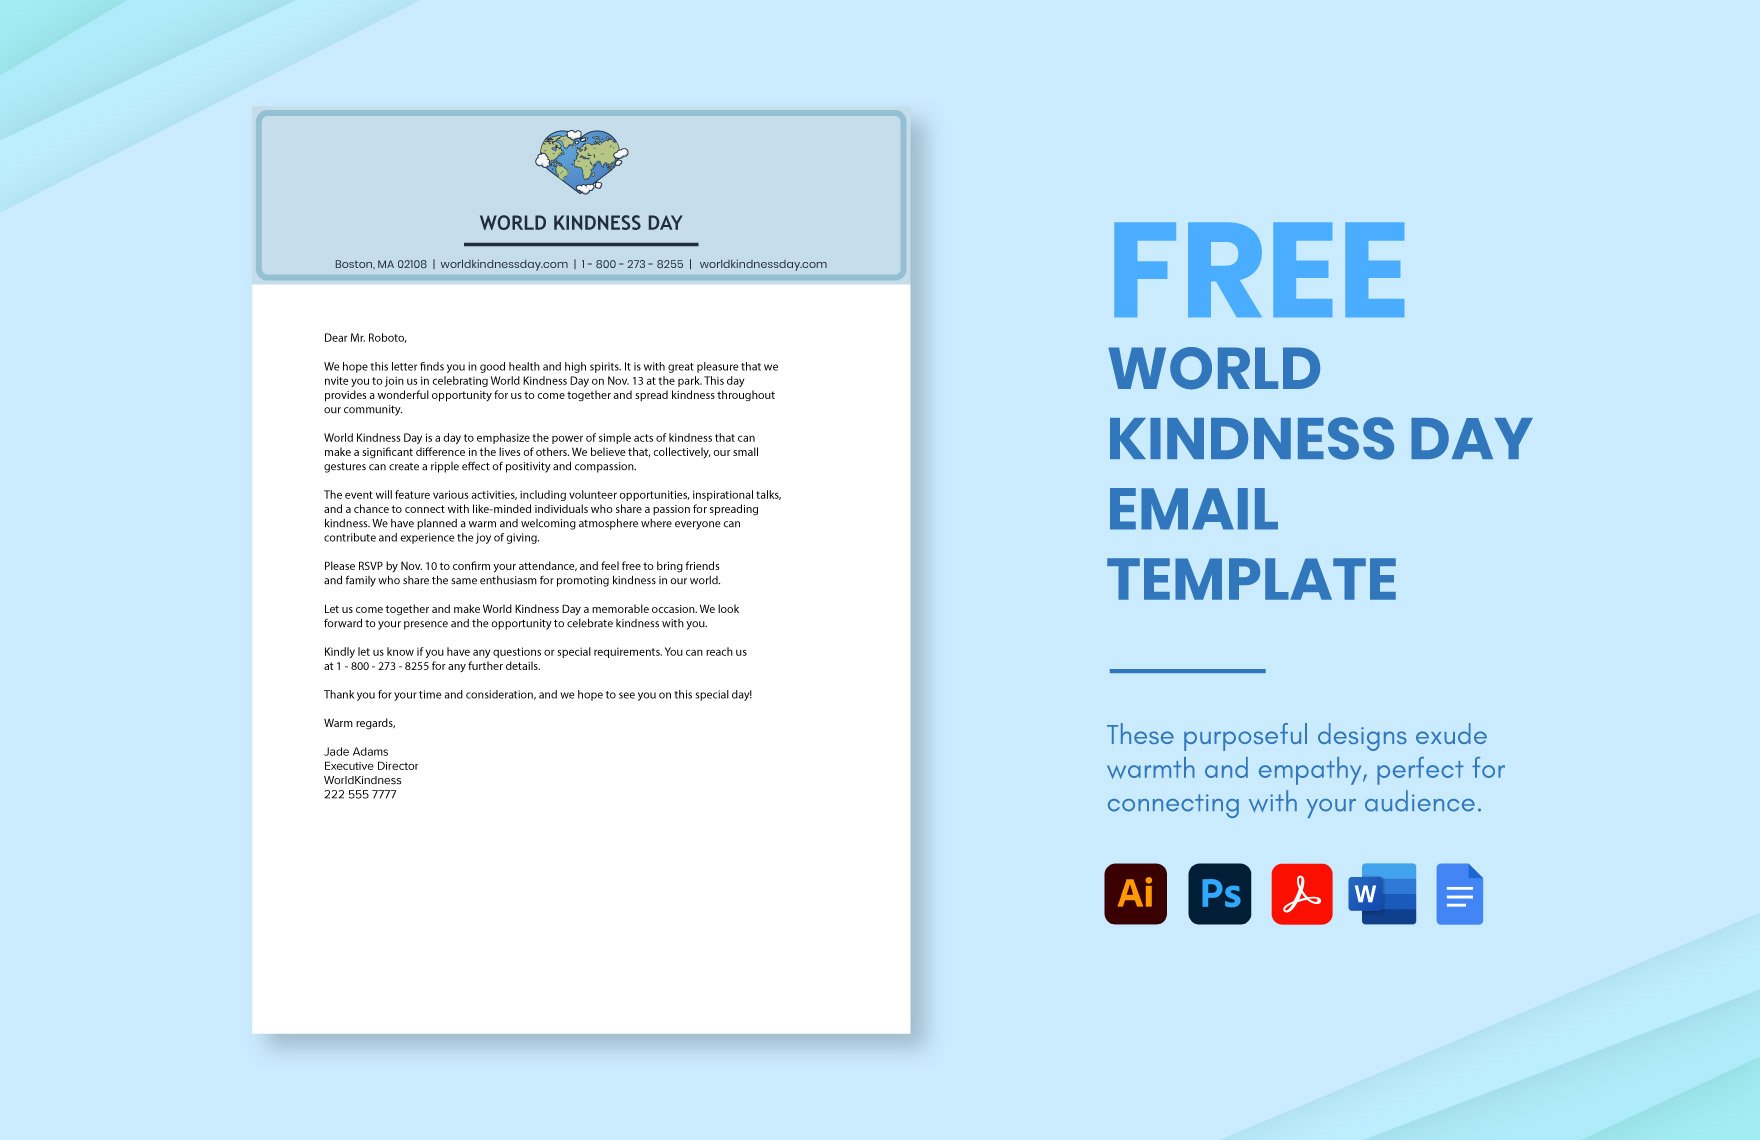 World Kindness Day Email Template in Word, Google Docs, PDF, Illustrator, PSD